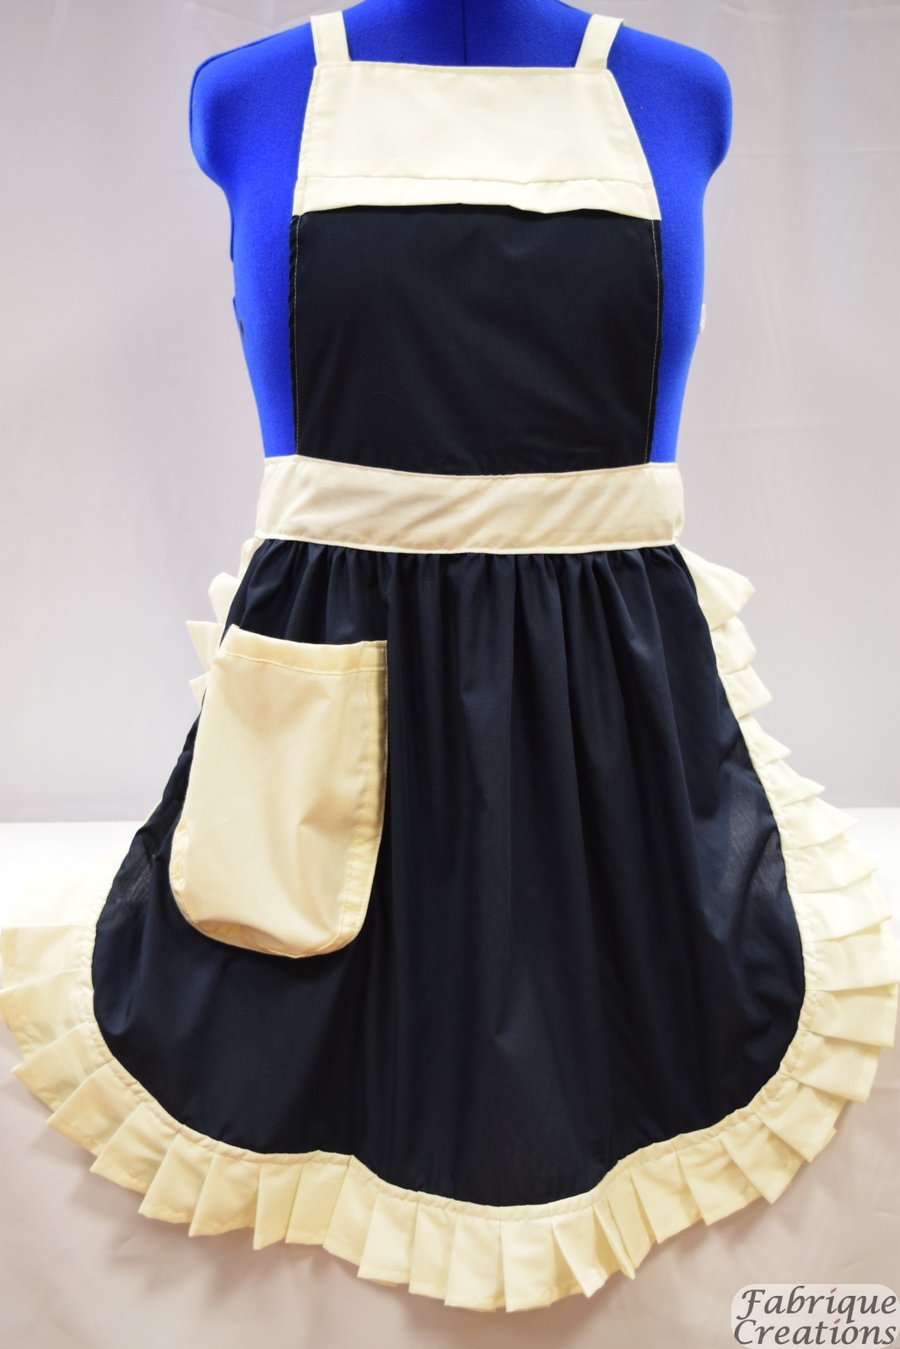 Vintage 50s Style Full Apron Pinny - Navy Blue with Cream Trim